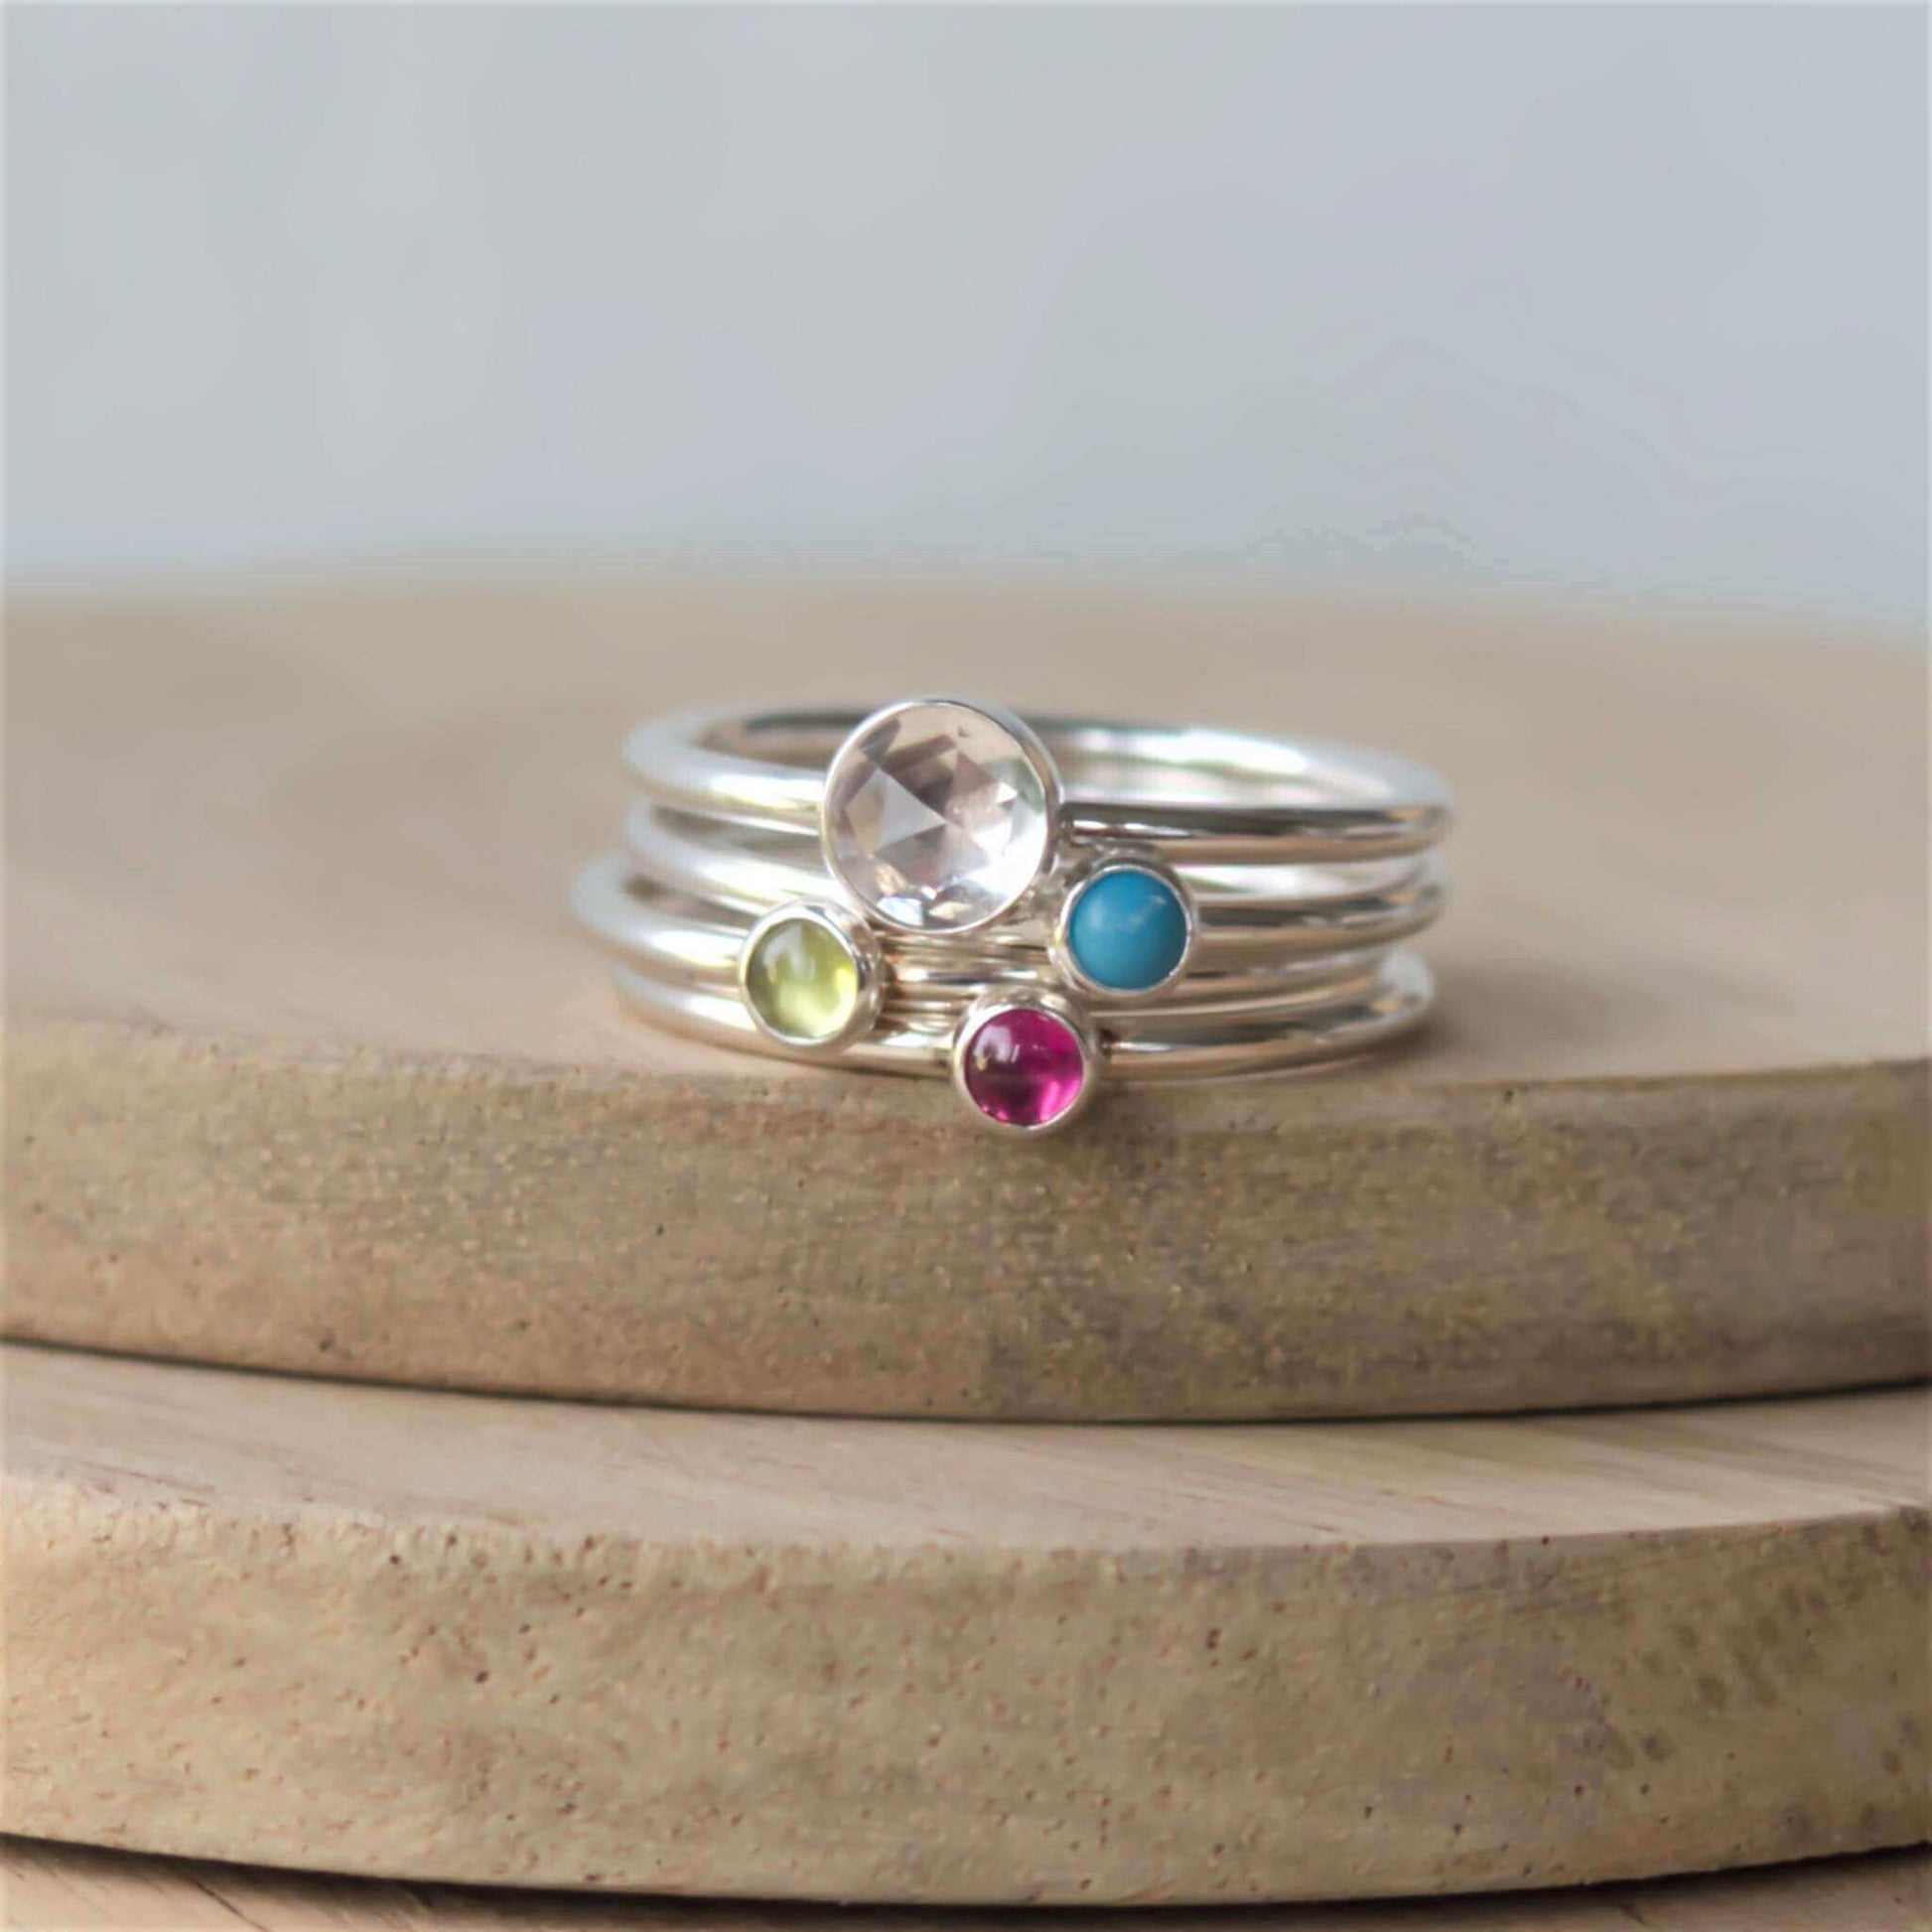 Four ring set of silver rings with different sized gemstones. Includes a 5mm faceted clear topaz, turquoise, peridot and pink lab ruby all 3mm in size. Handmade by maram jewellery in Edinburgh